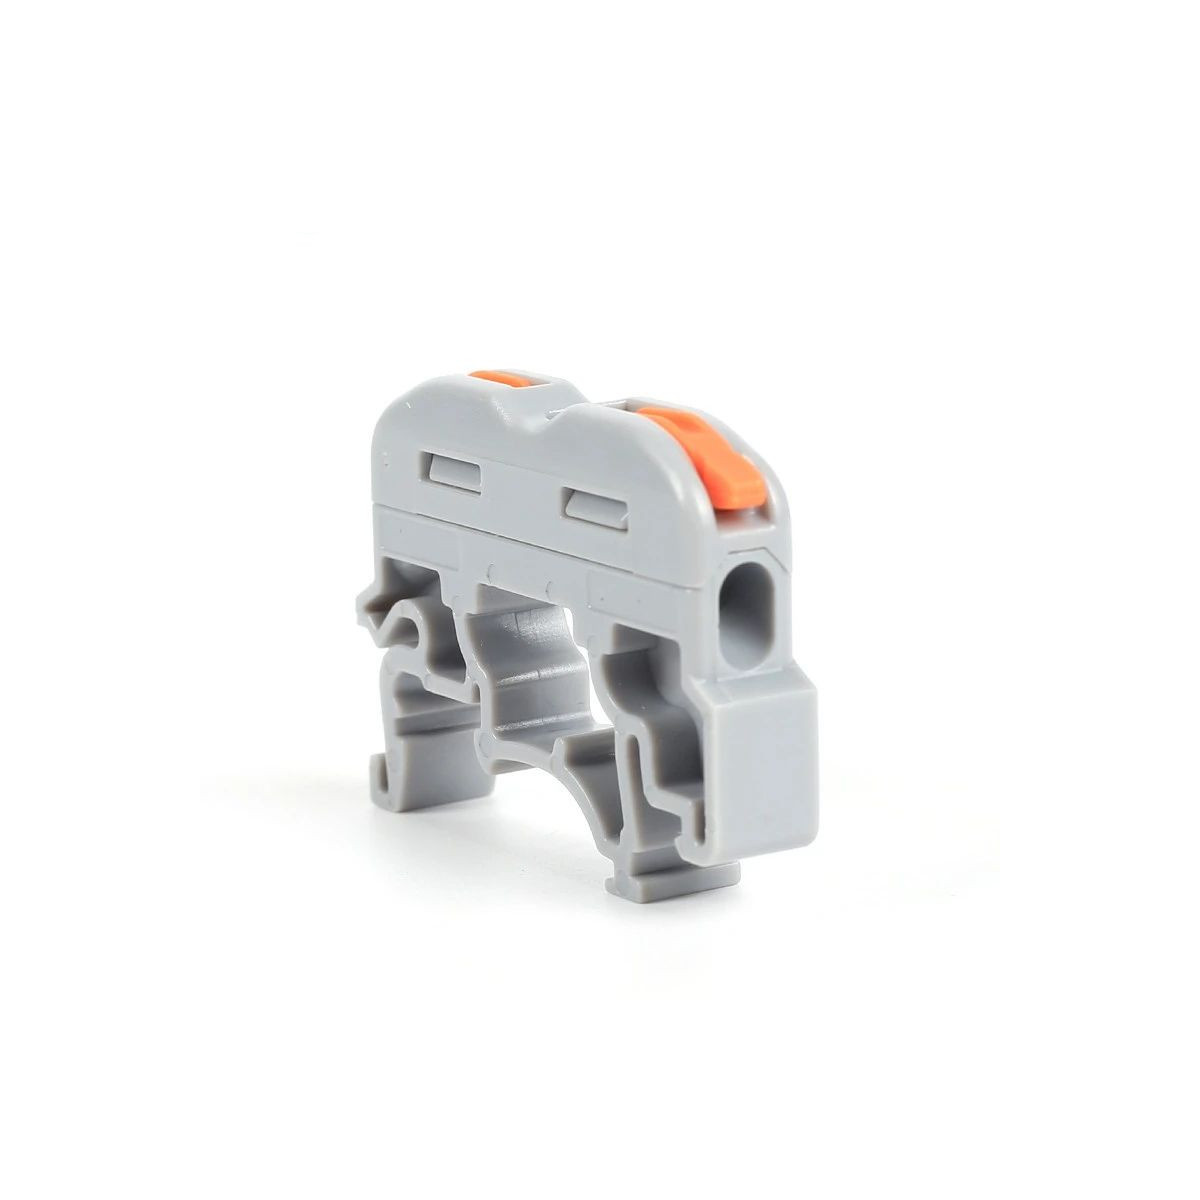 DIN rail quick connector 1 in 1 out 0.08-4mm²